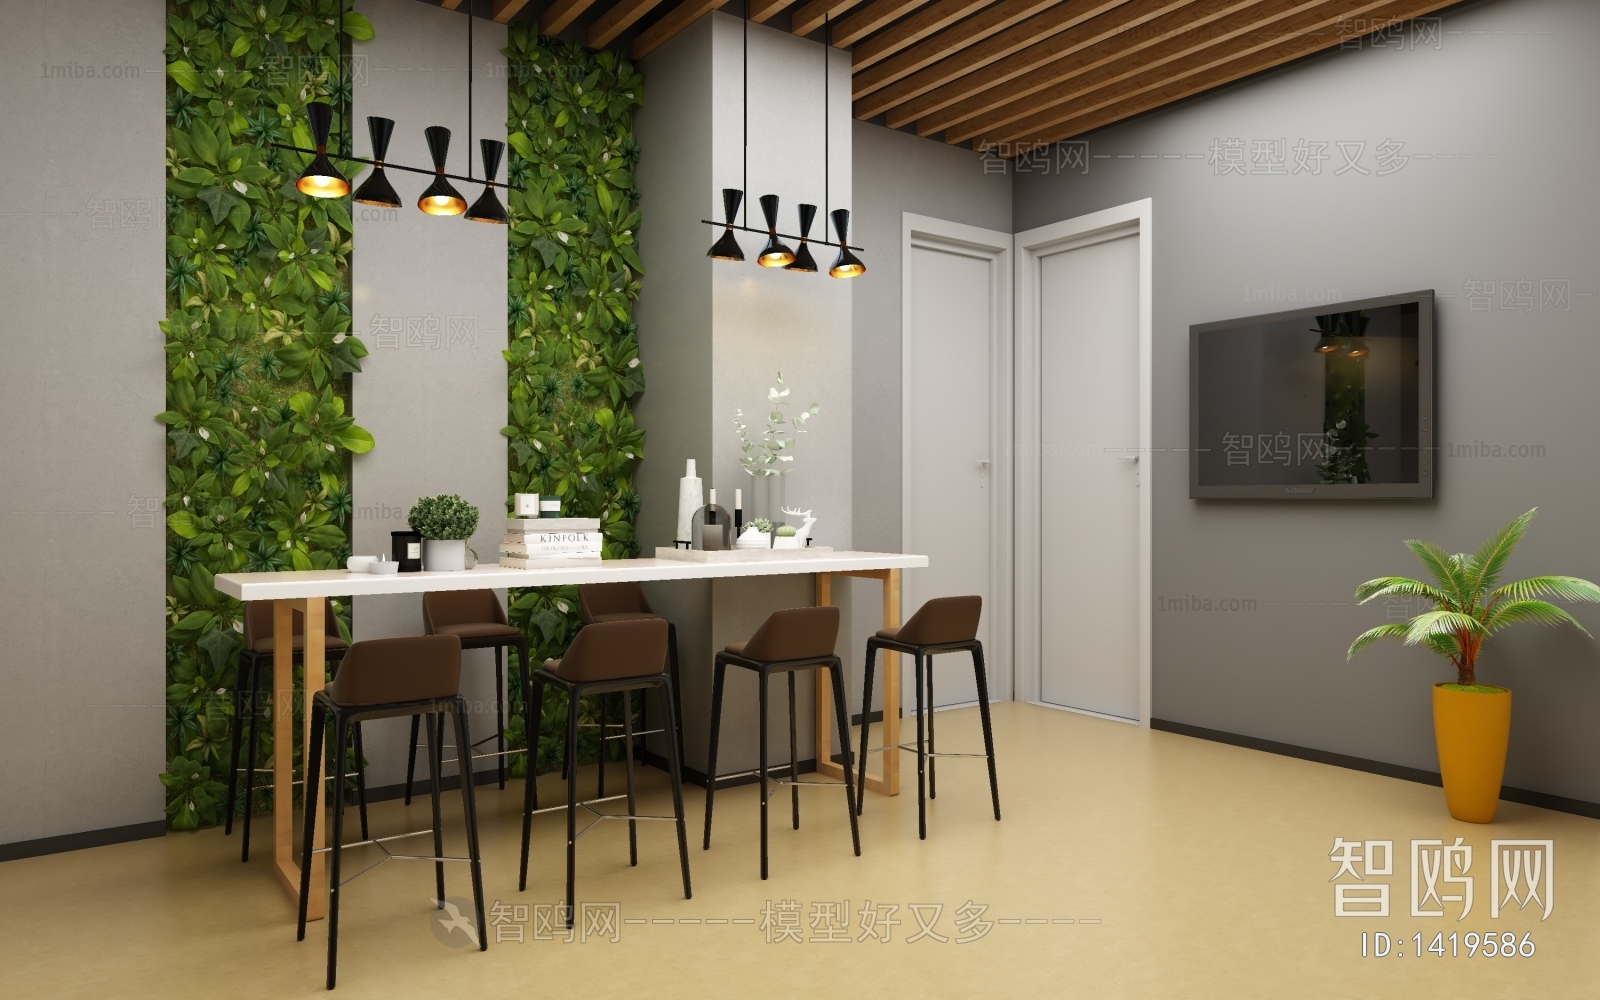 Modern Industrial Style Office Rest Area